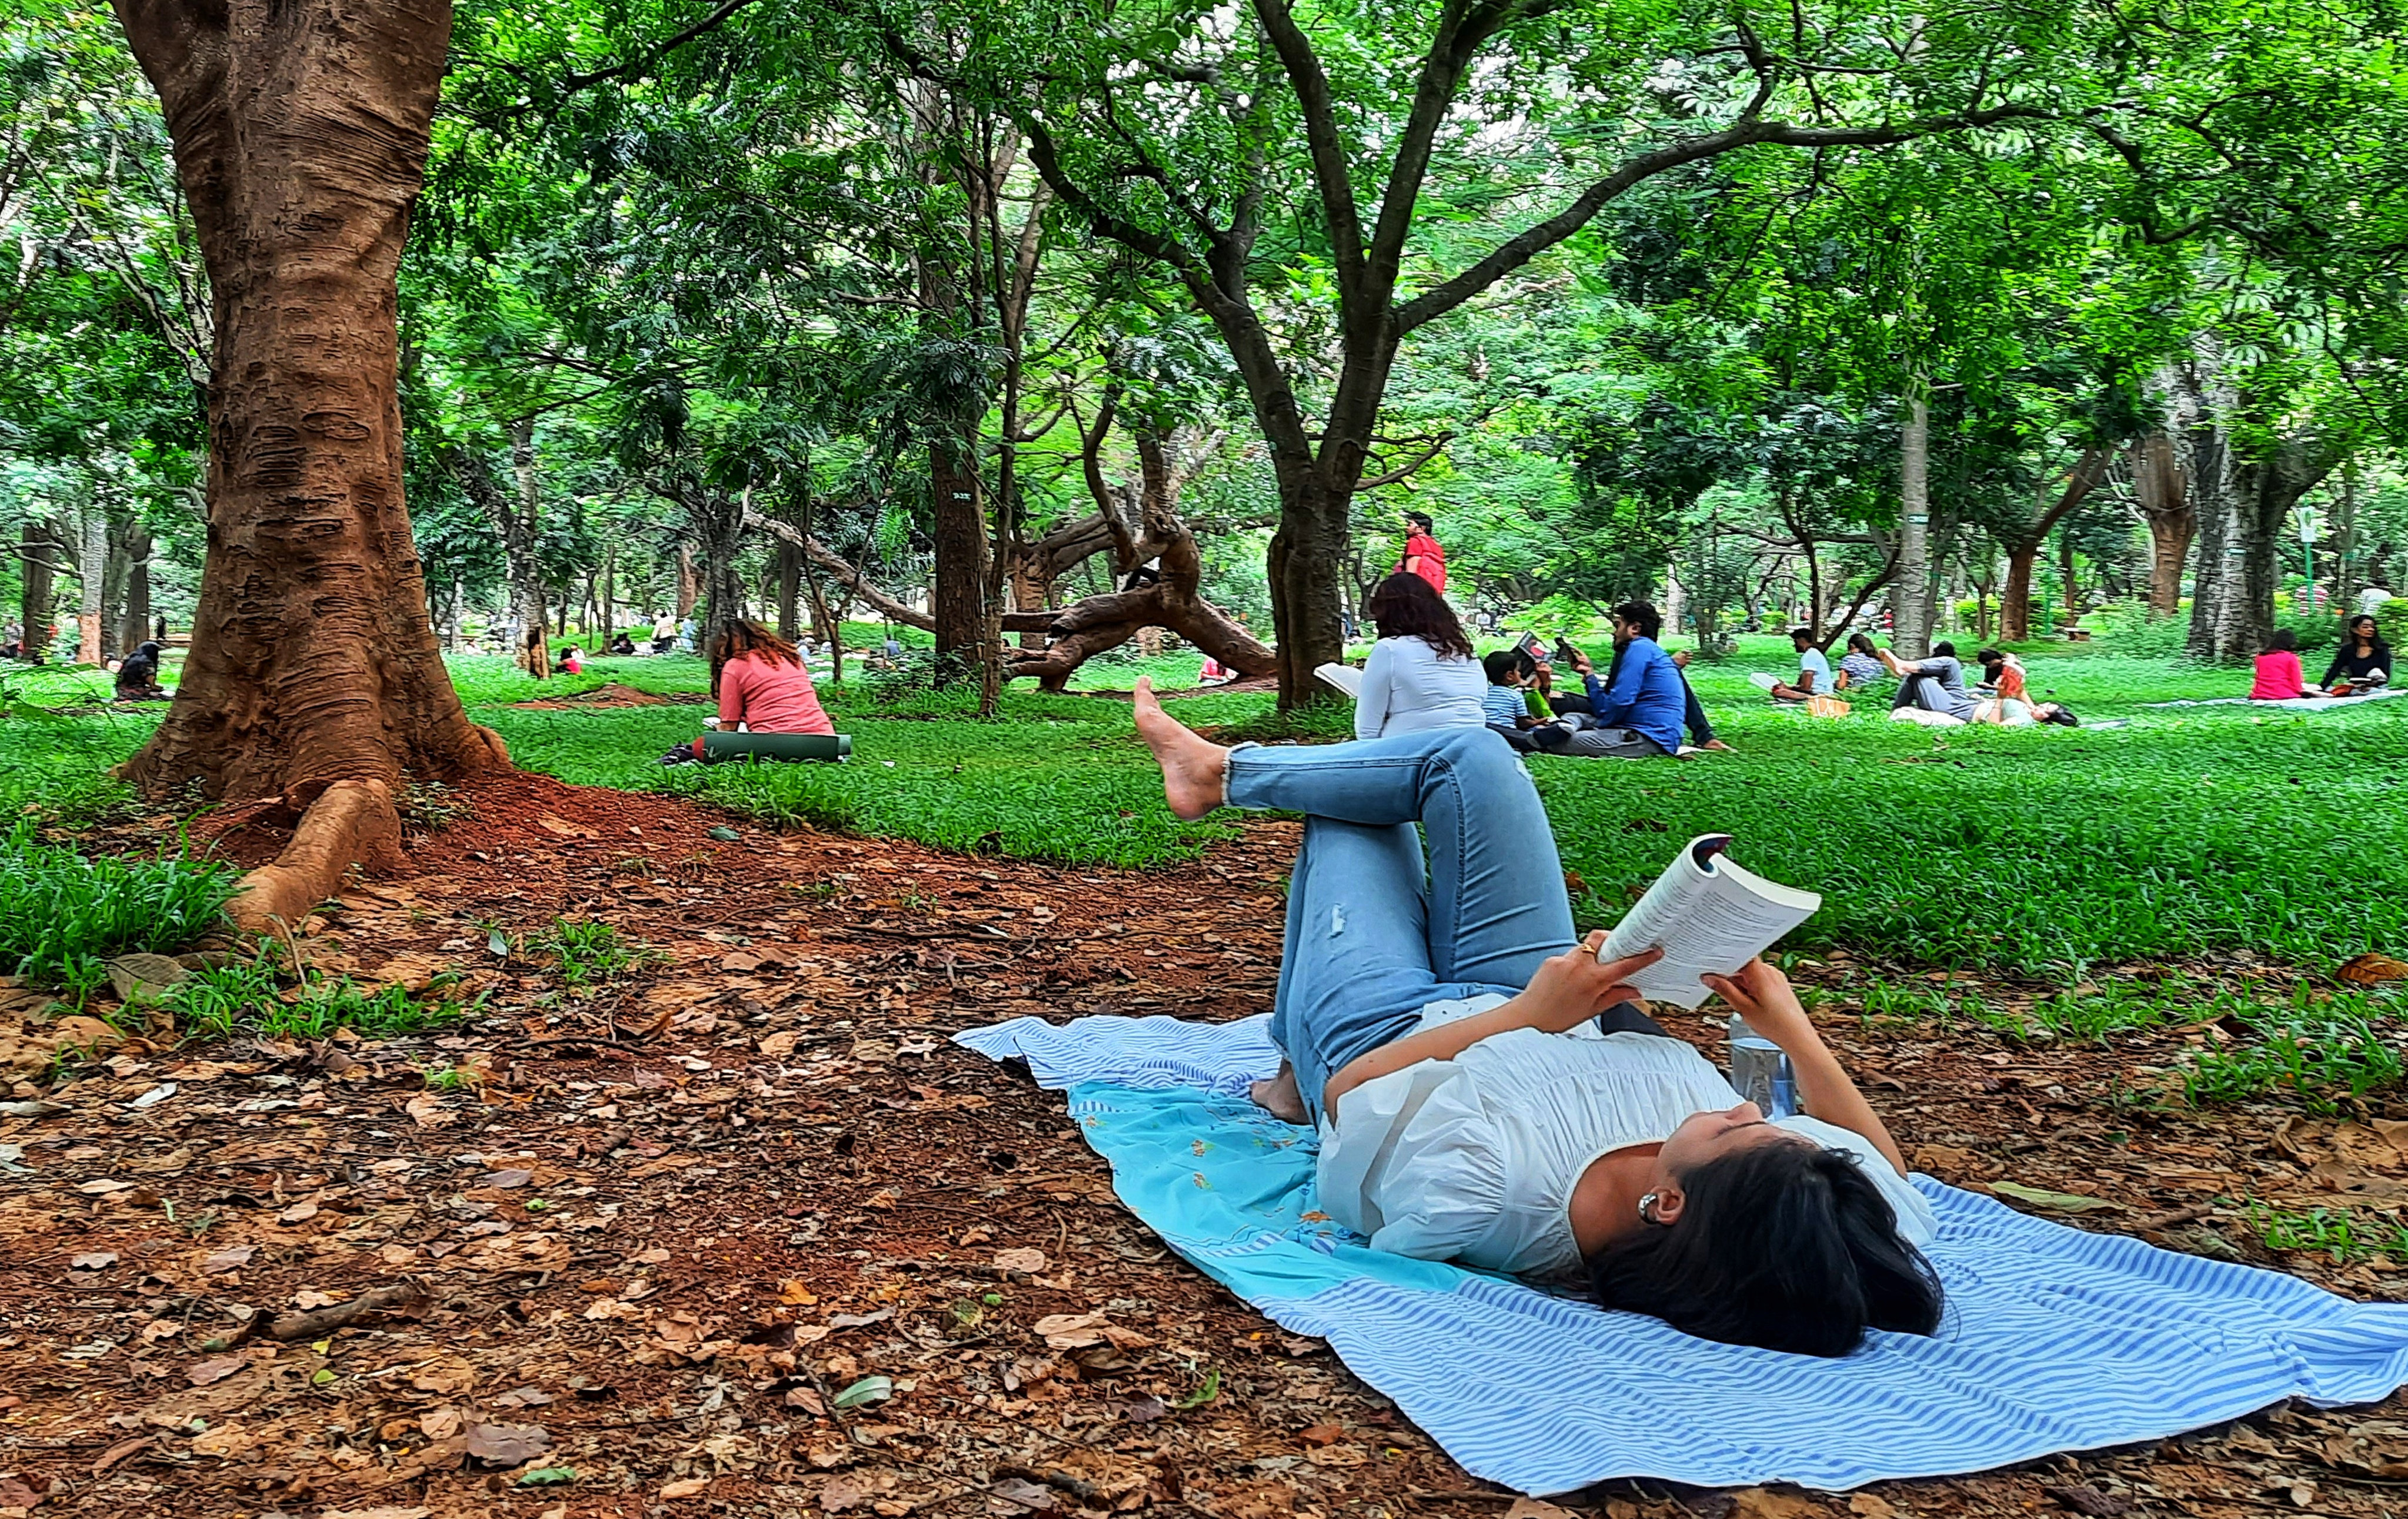 Cubbon Reads is a community reading initiative that takes place in a park in Bangalore, India. Photo: SCMP